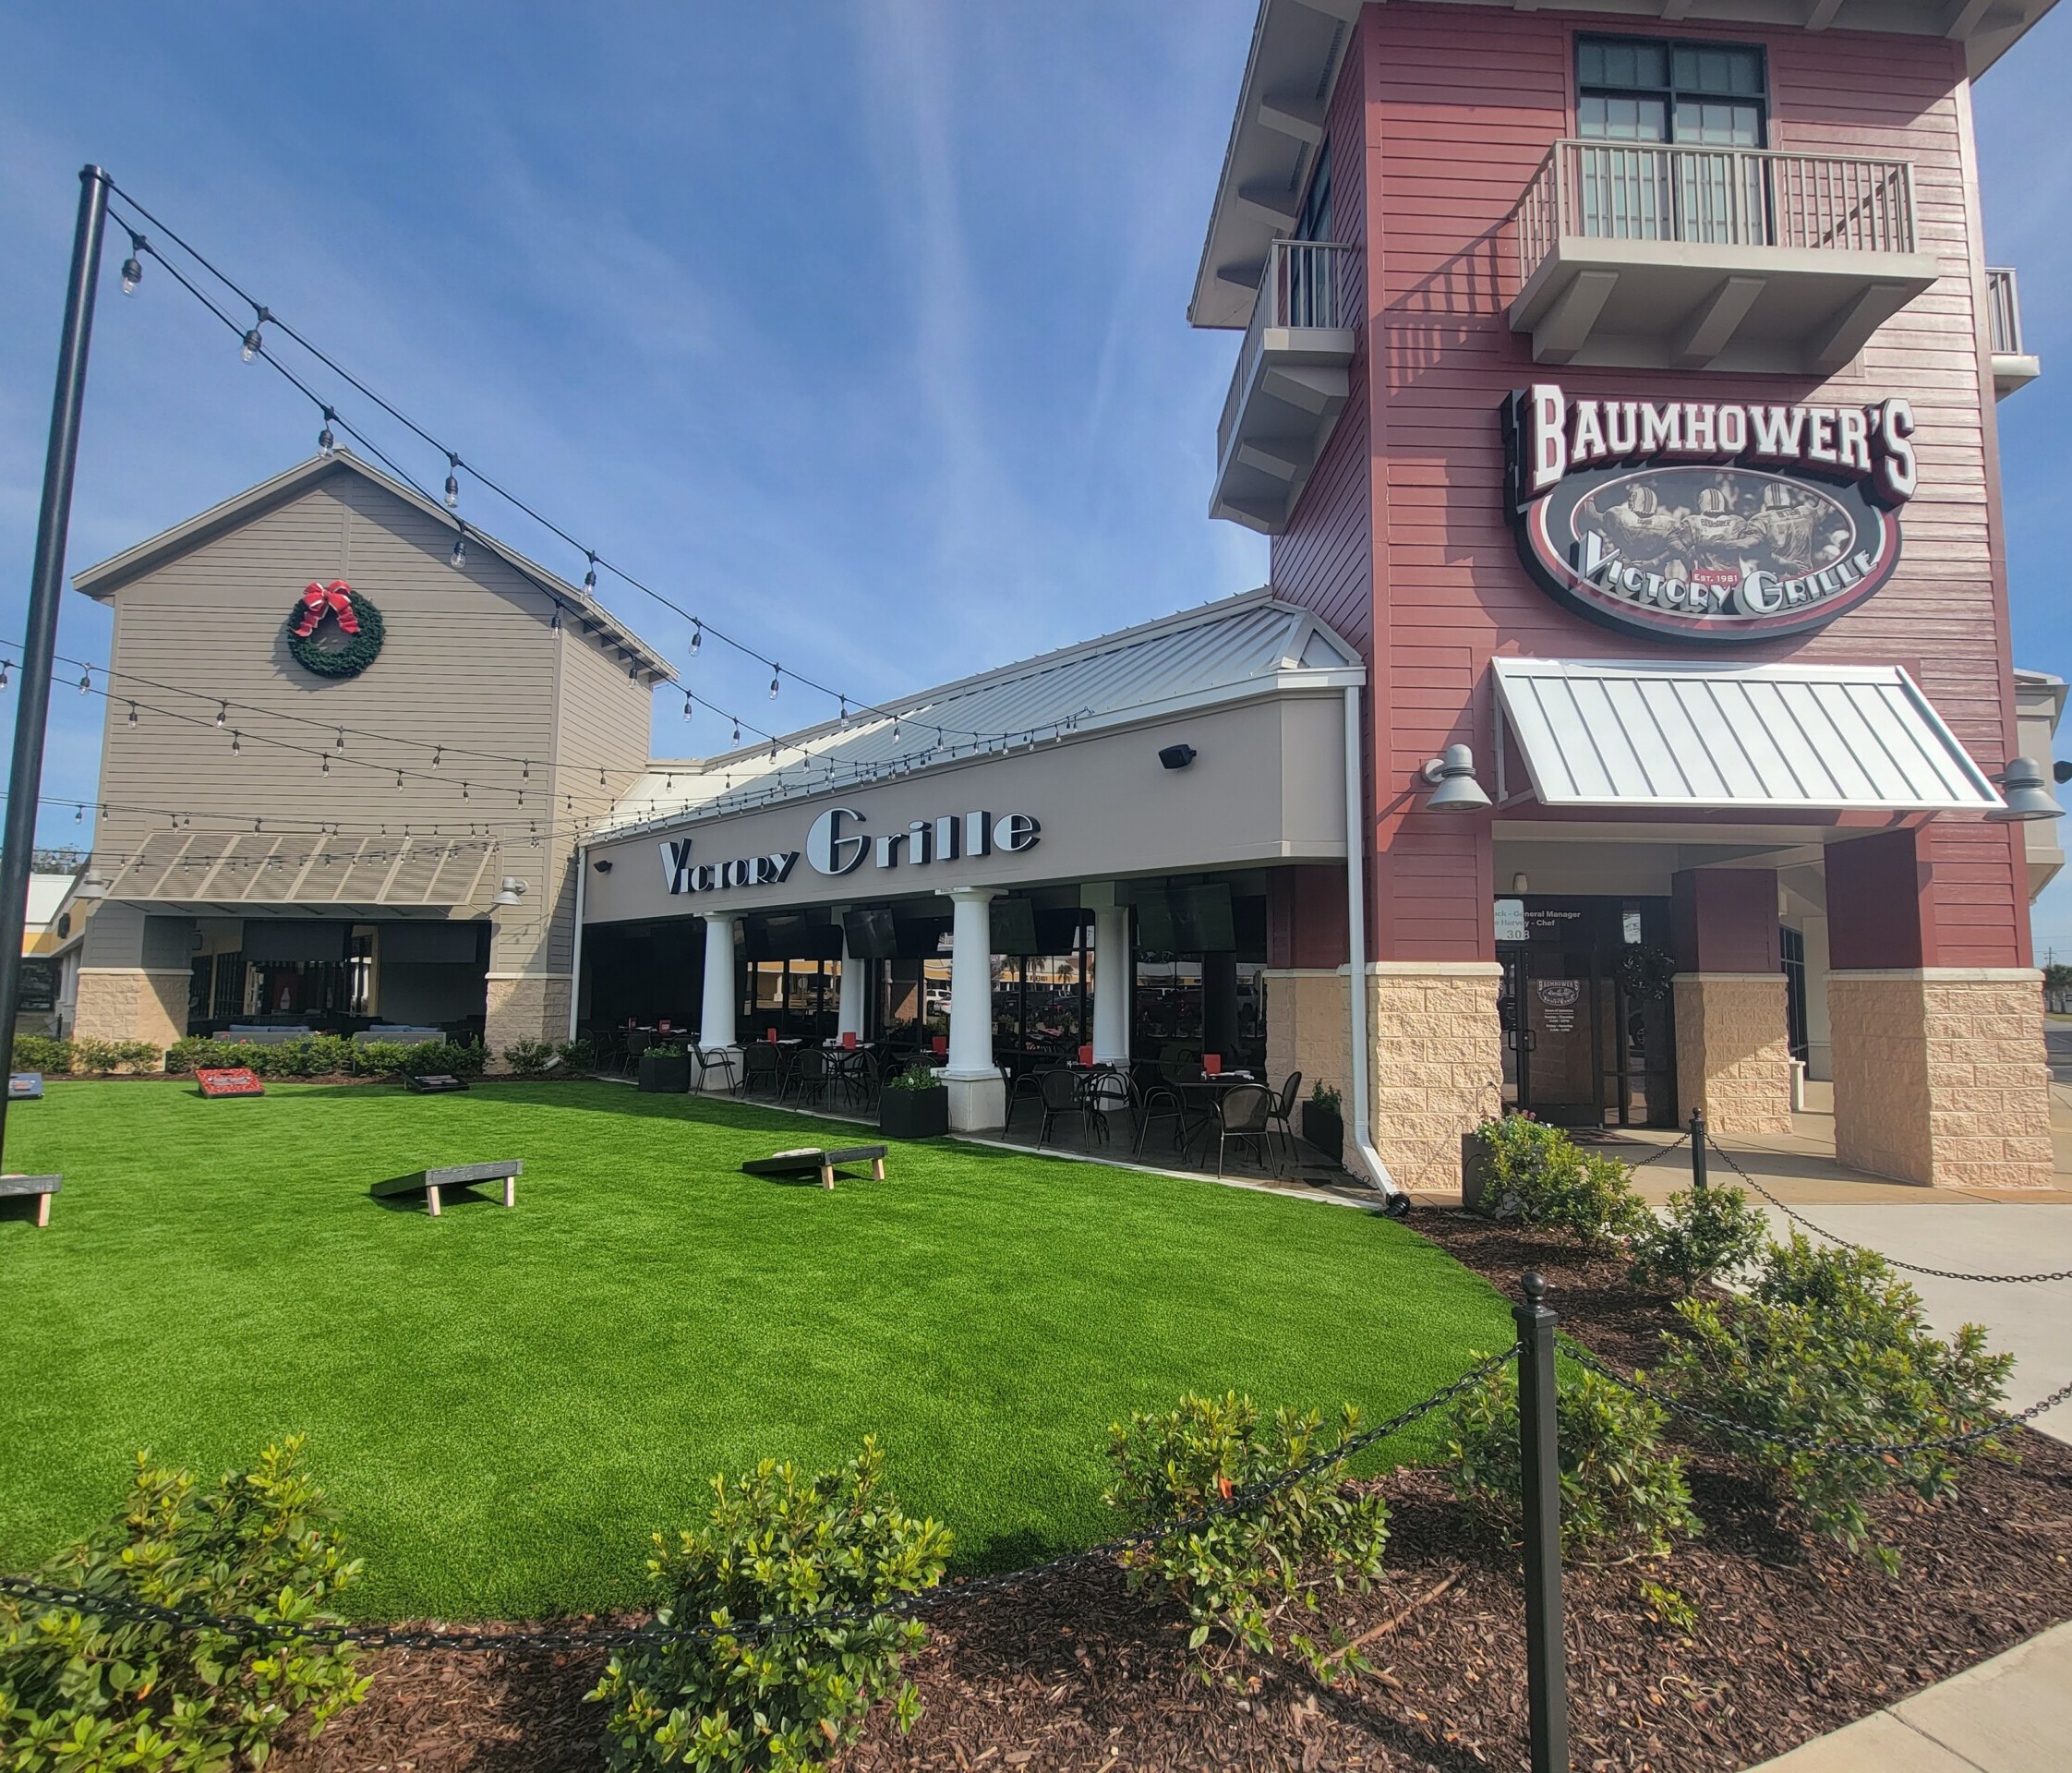 Baumhower’s Victory Grille